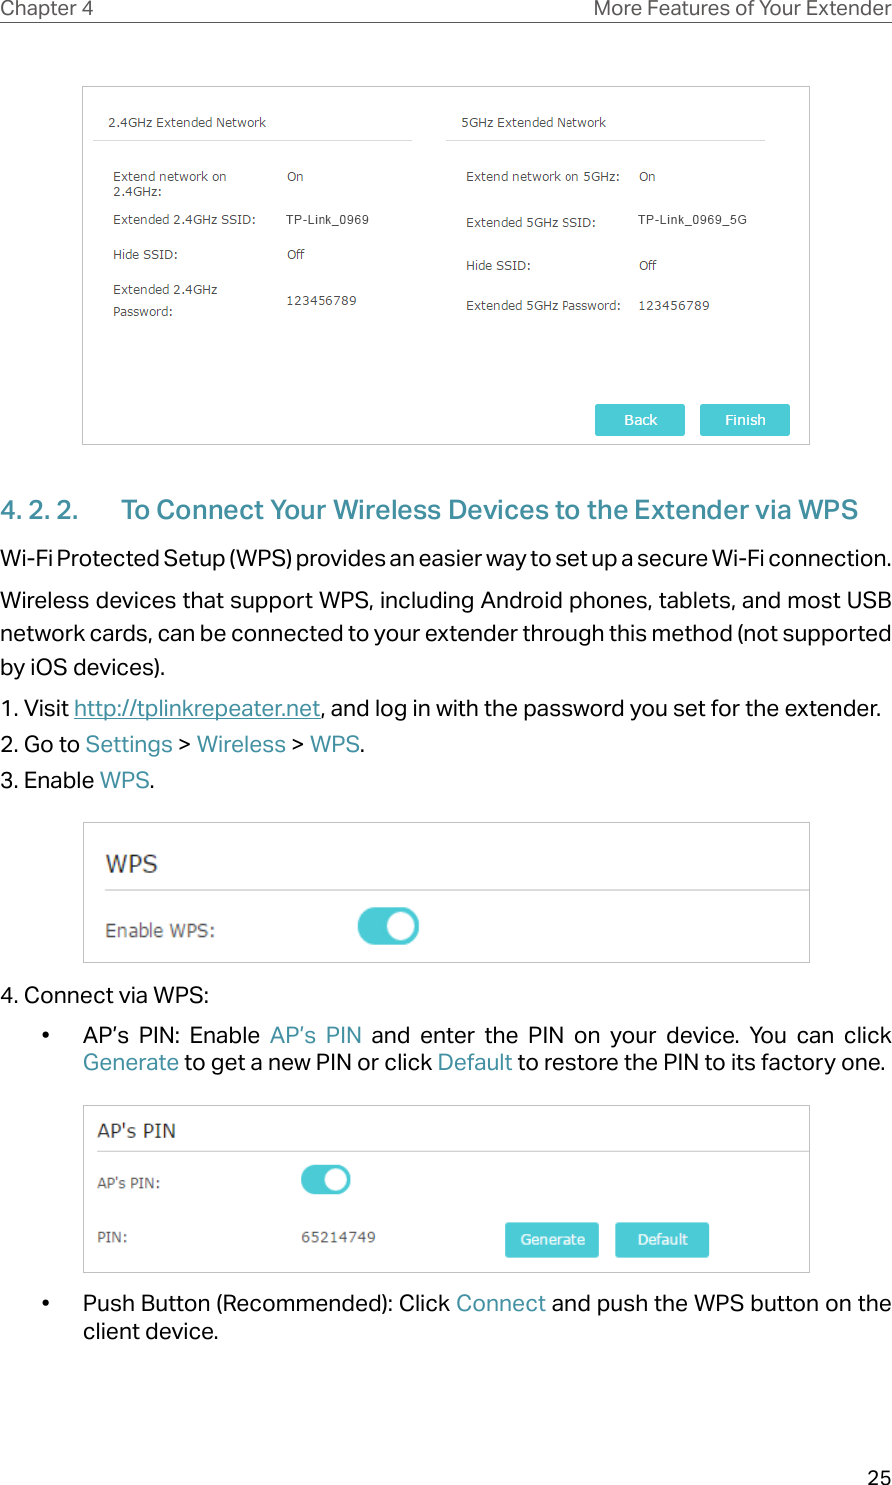 25Chapter 4 More Features of Your Extender4. 2. 2.  To Connect Your Wireless Devices to the Extender via WPSWi-Fi Protected Setup (WPS) provides an easier way to set up a secure Wi-Fi connection.Wireless devices that support WPS, including Android phones, tablets, and most USB network cards, can be connected to your extender through this method (not supported by iOS devices).1. Visit http://tplinkrepeater.net, and log in with the password you set for the extender.2. Go to Settings &gt; Wireless &gt; WPS. 3. Enable WPS.4. Connect via WPS:•  AP’s PIN: Enable AP’s PIN and enter the PIN on your device. You can click Generate to get a new PIN or click Default to restore the PIN to its factory one.•  Push Button (Recommended): Click Connect and push the WPS button on the client device.